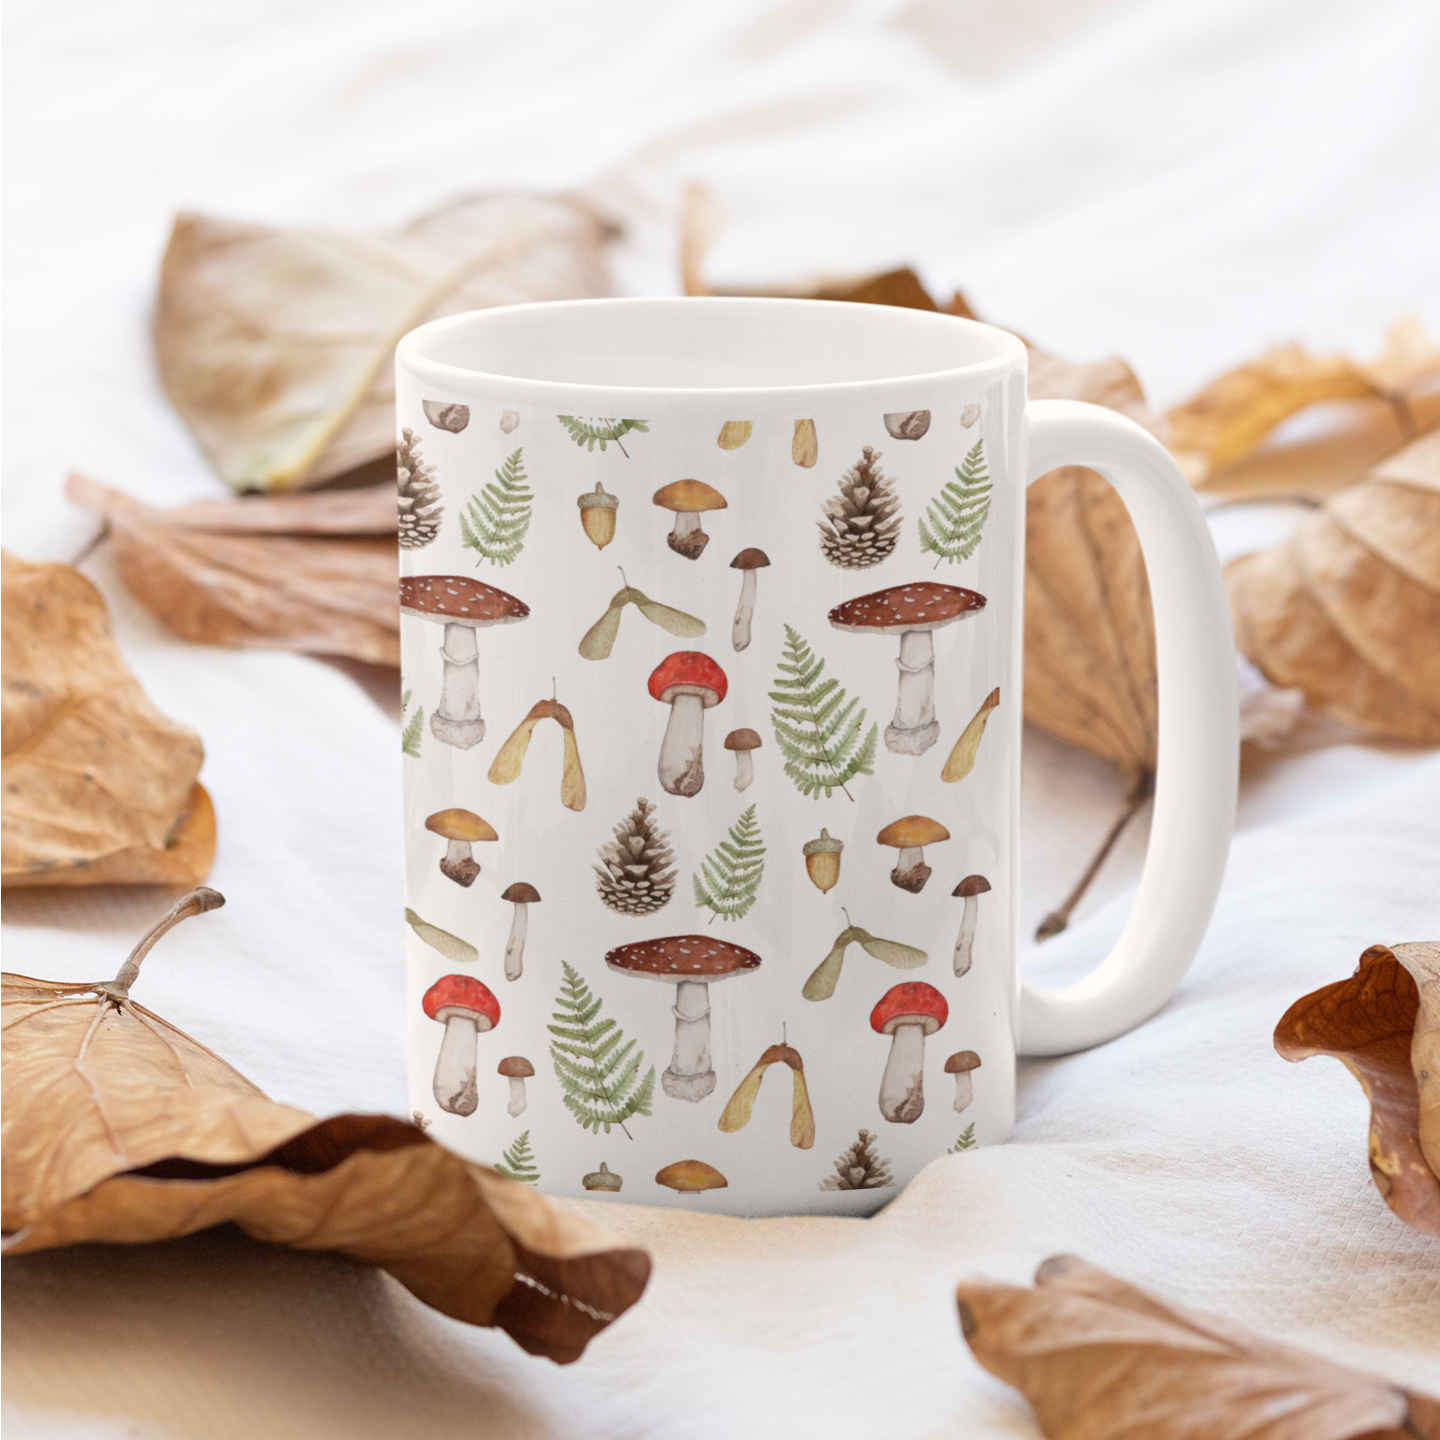 The Butterfly & Toadstool Forager Ceramic Mug